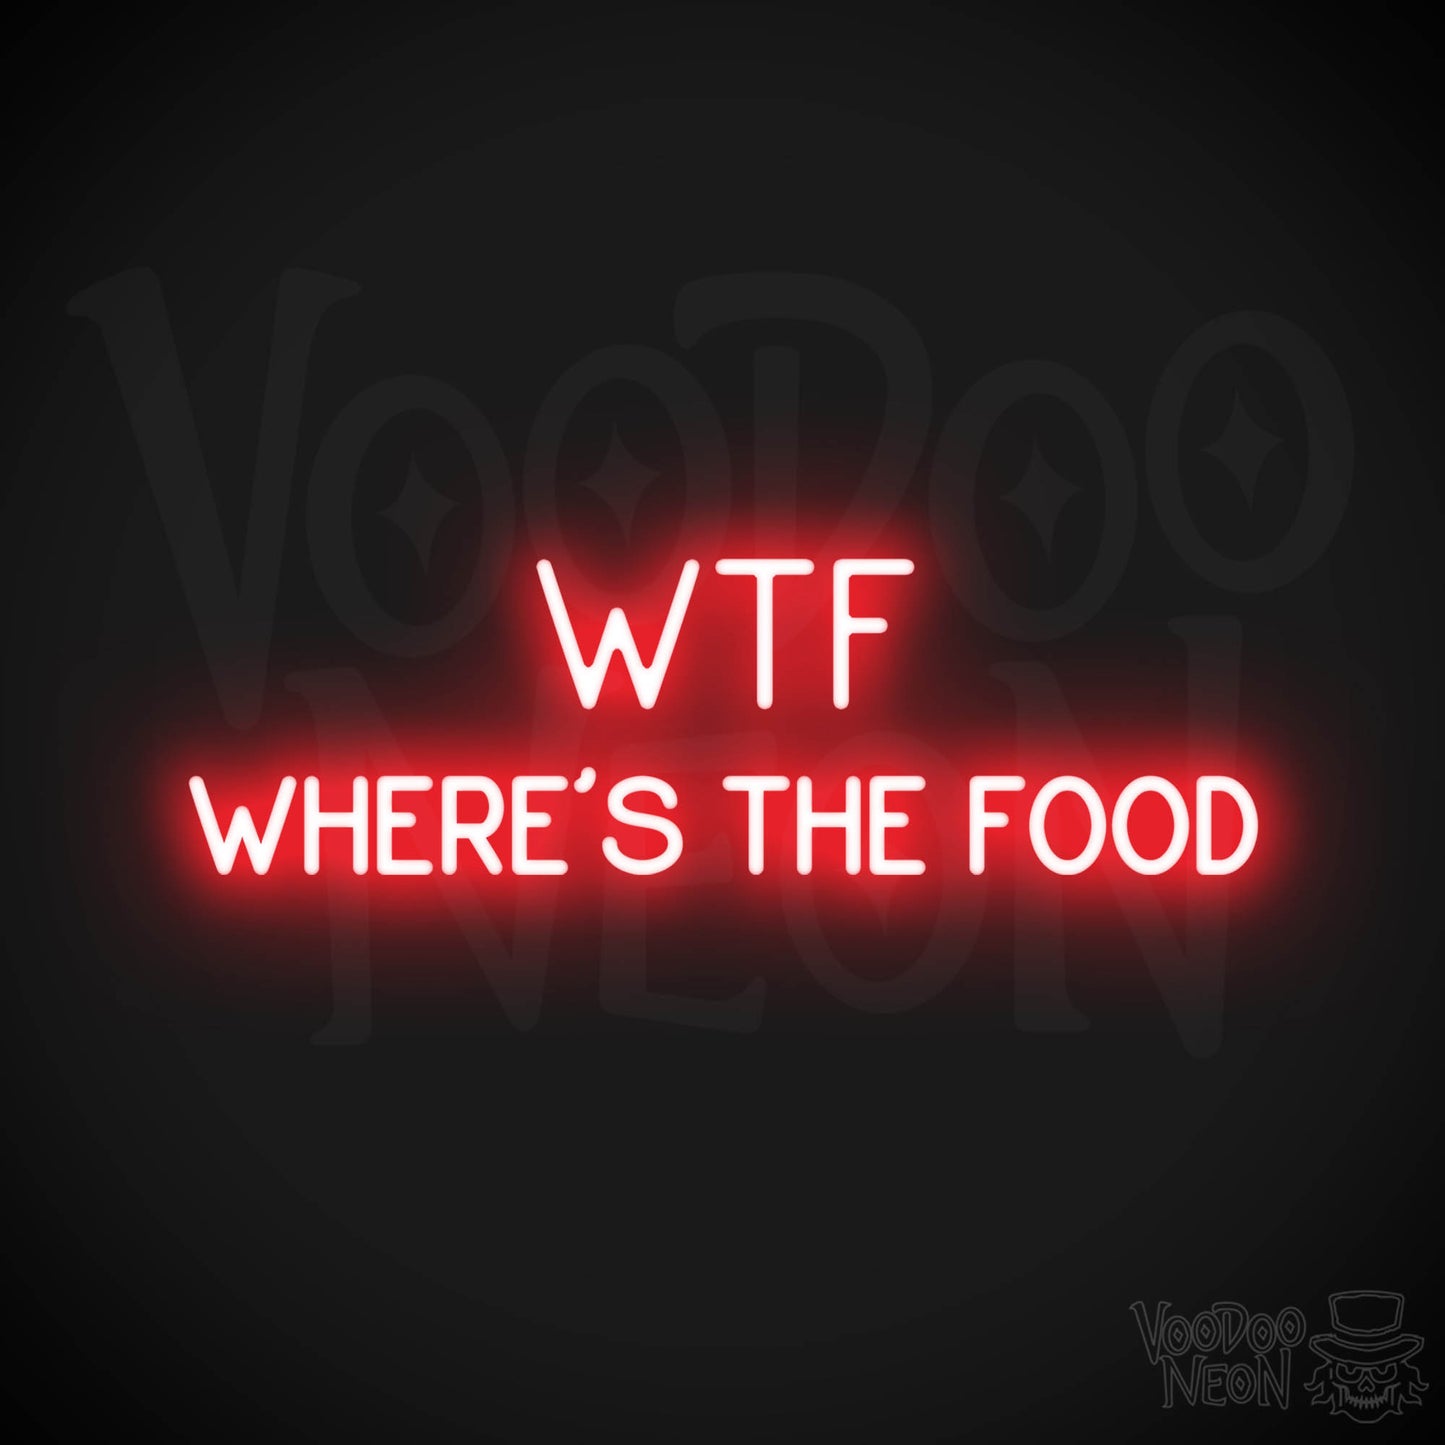 Wtf (Wheres The Food) LED Neon - Red